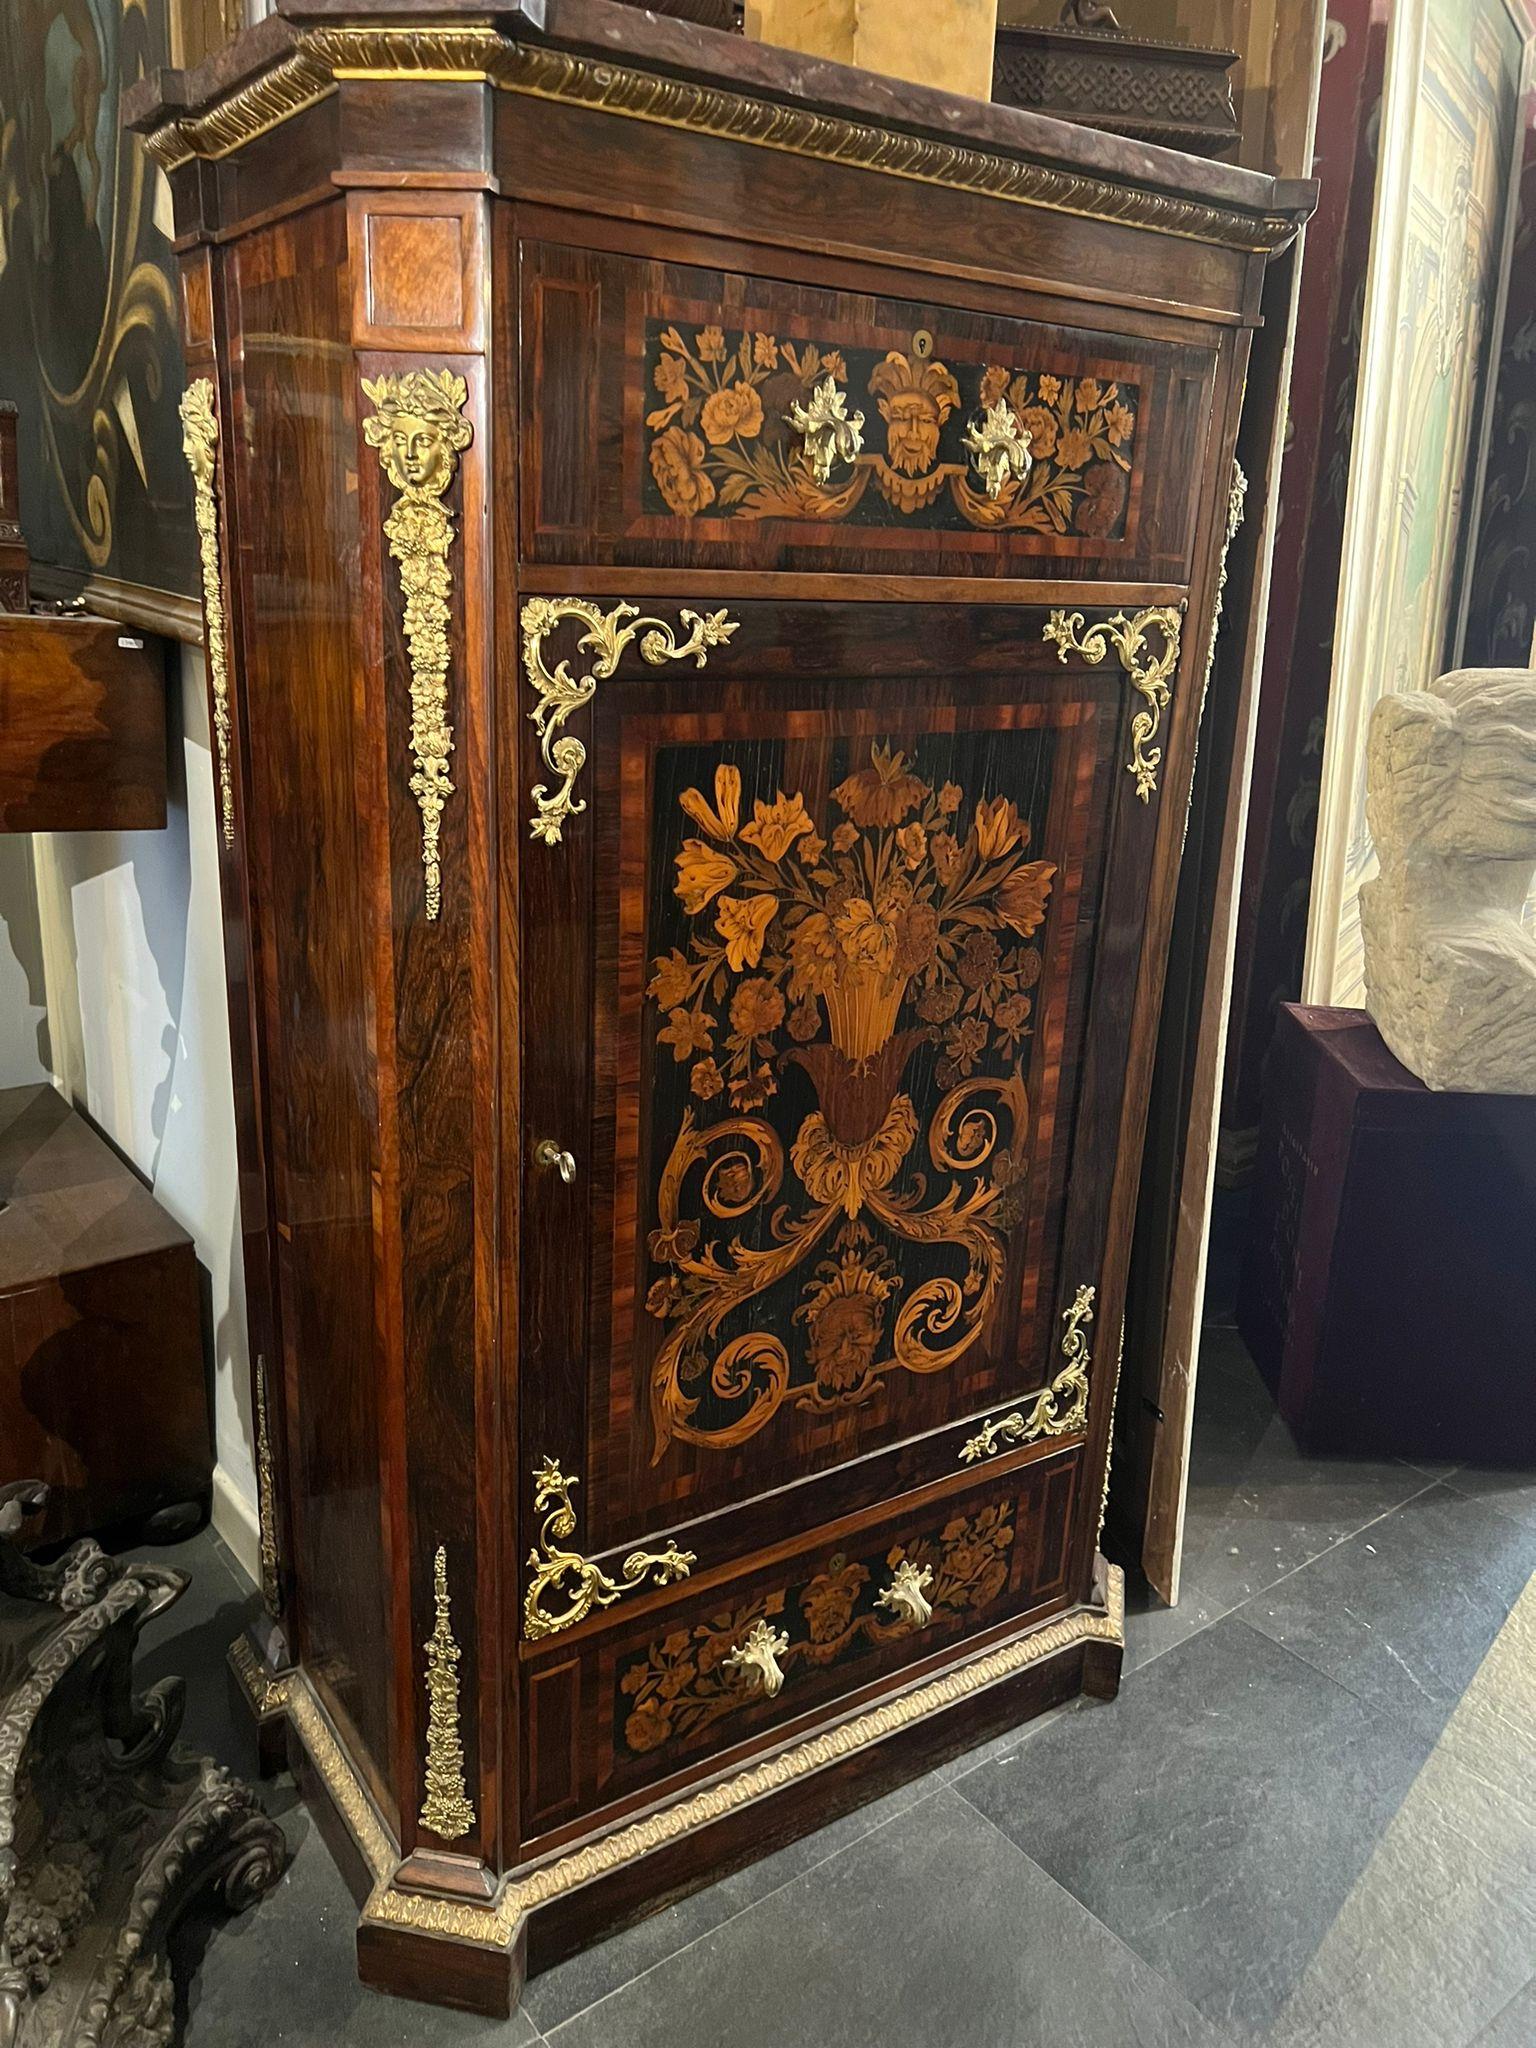 Elegant inlaid cabinet, this cabinet features a very high level inlay. In the central part there is a triumph of polychrome flowers framed by a sharpening, at the corners of which are mounted four bronze friezes which also appear in the rounded